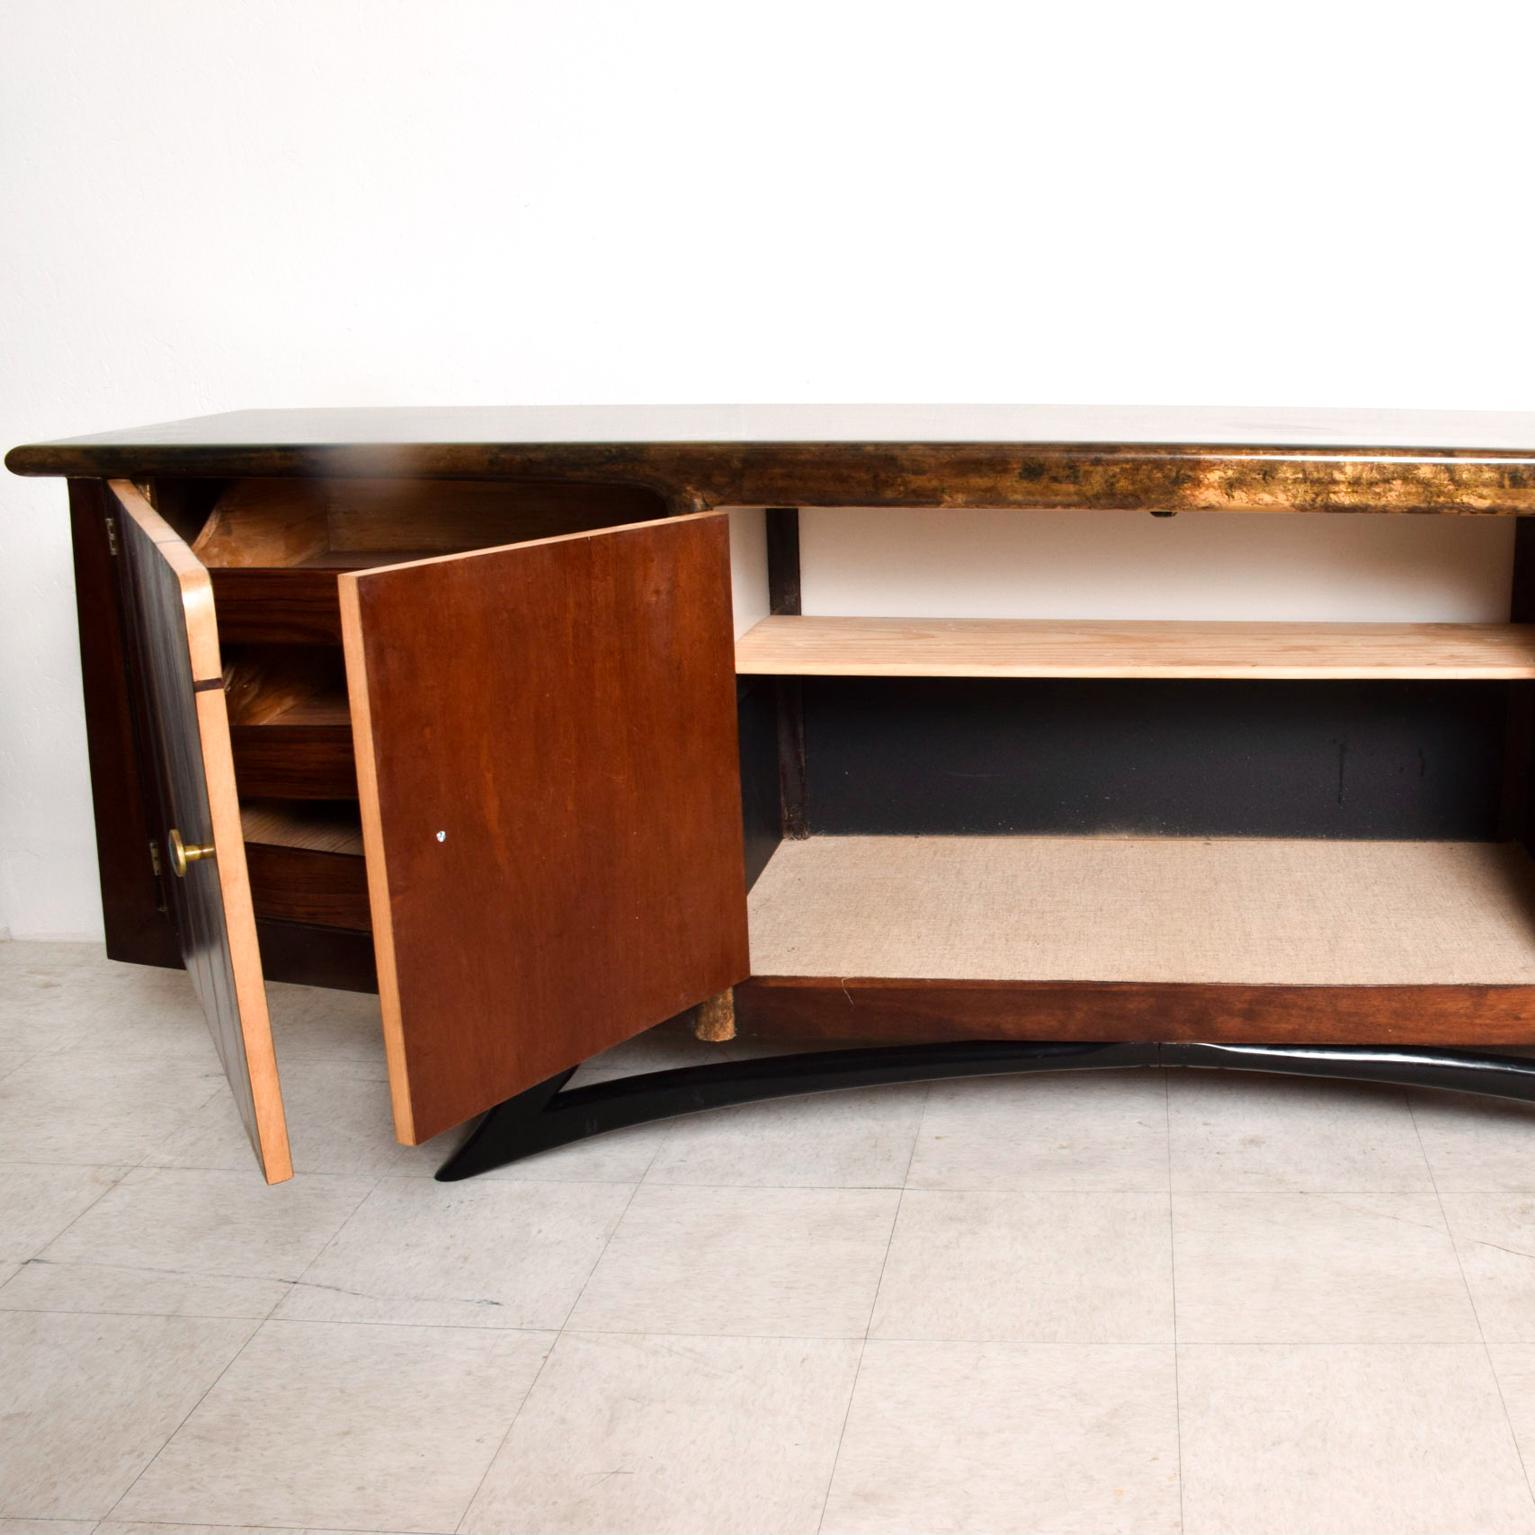 For your consideration, a midcentury Mexican Modernist credenza attributed to Eugenio Escudero with Pepe Mendoza pulls. Sculptural shape with gold leaf top and beautiful art patina. Feature drawers on each side (three) and open storage in the